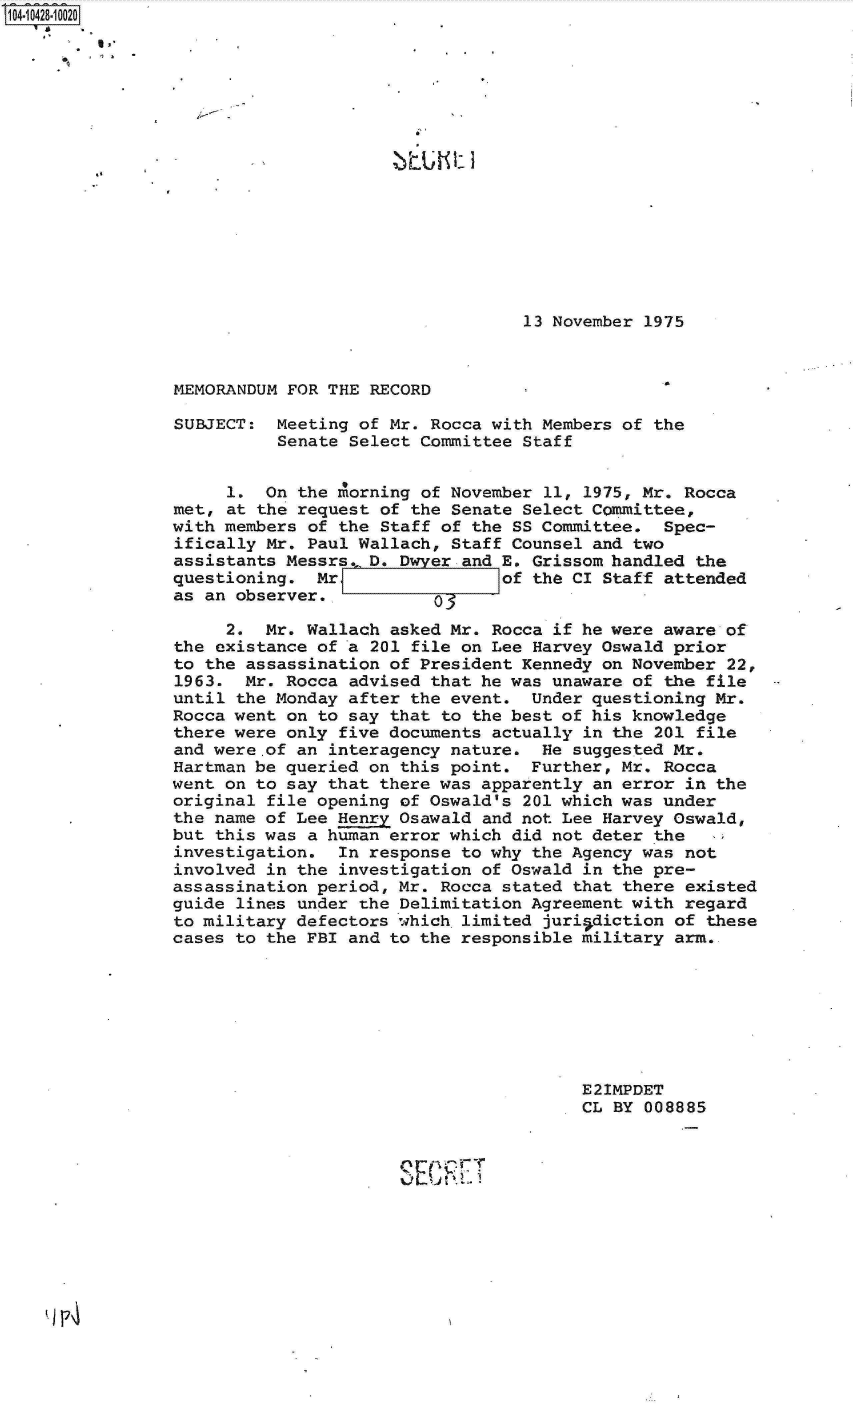 handle is hein.jfk/jfkarch19722 and id is 1 raw text is: 104-10428-10020
















                                                  13 November 1975



                MEMORANDUM FOR THE RECORD

                SUBJECT:  Meeting of Mr. Rocca with Members of the
                          Senate Select Committee Staff


                     1.  On the morning of November 11, 1975, Mr. Rocca
                met, at the request of the Senate Select Committee,
                with members of the Staff of the SS Committee.  Spec-
                ifically Mr. Paul Wallach, Staff Counsel and two
                assistants Messrs. D. D  er and E. Grissom handled the
                questioning.  Mr                of the CI Staff attended
                as an observer.,

                     2.  Mr. Wallach asked Mr. Rocca if he were aware of
                the existance of a 201 file on Lee Harvey Oswald prior
                to the assassination of President Kennedy on November 22,
                1963.  Mr. Rocca advised that he was unaware of the file
                until the Monday after the event.  Under questioning Mr.
                Rocca went on to say that to the best of his knowledge
                there were only five documents actually in the 201 file
                and were.of an interagency nature.  He suggested Mr.
                Hartman be queried on this point.  Further, Mr. Rocca
                went on to say that there was apparently an error in the
                original file opening of Oswald's 201 which was under
                the name of Lee Henry Osawald and not Lee Harvey Oswald,
                but this was a human error which did not deter the
                investigation.  In response to why the Agency was not
                involved in the investigation of Oswald in the pre-
                assassination period, Mr. Rocca stated that there existed
                guide lines under the Delimitation Agreement with regard
                to military defectors which limited juri-sdiction of these
                cases to the FBI and to the responsible military arm..







                                                        E21MPDET
                                                        CL BY 008885


                                             IT
                                      0 L~n-


